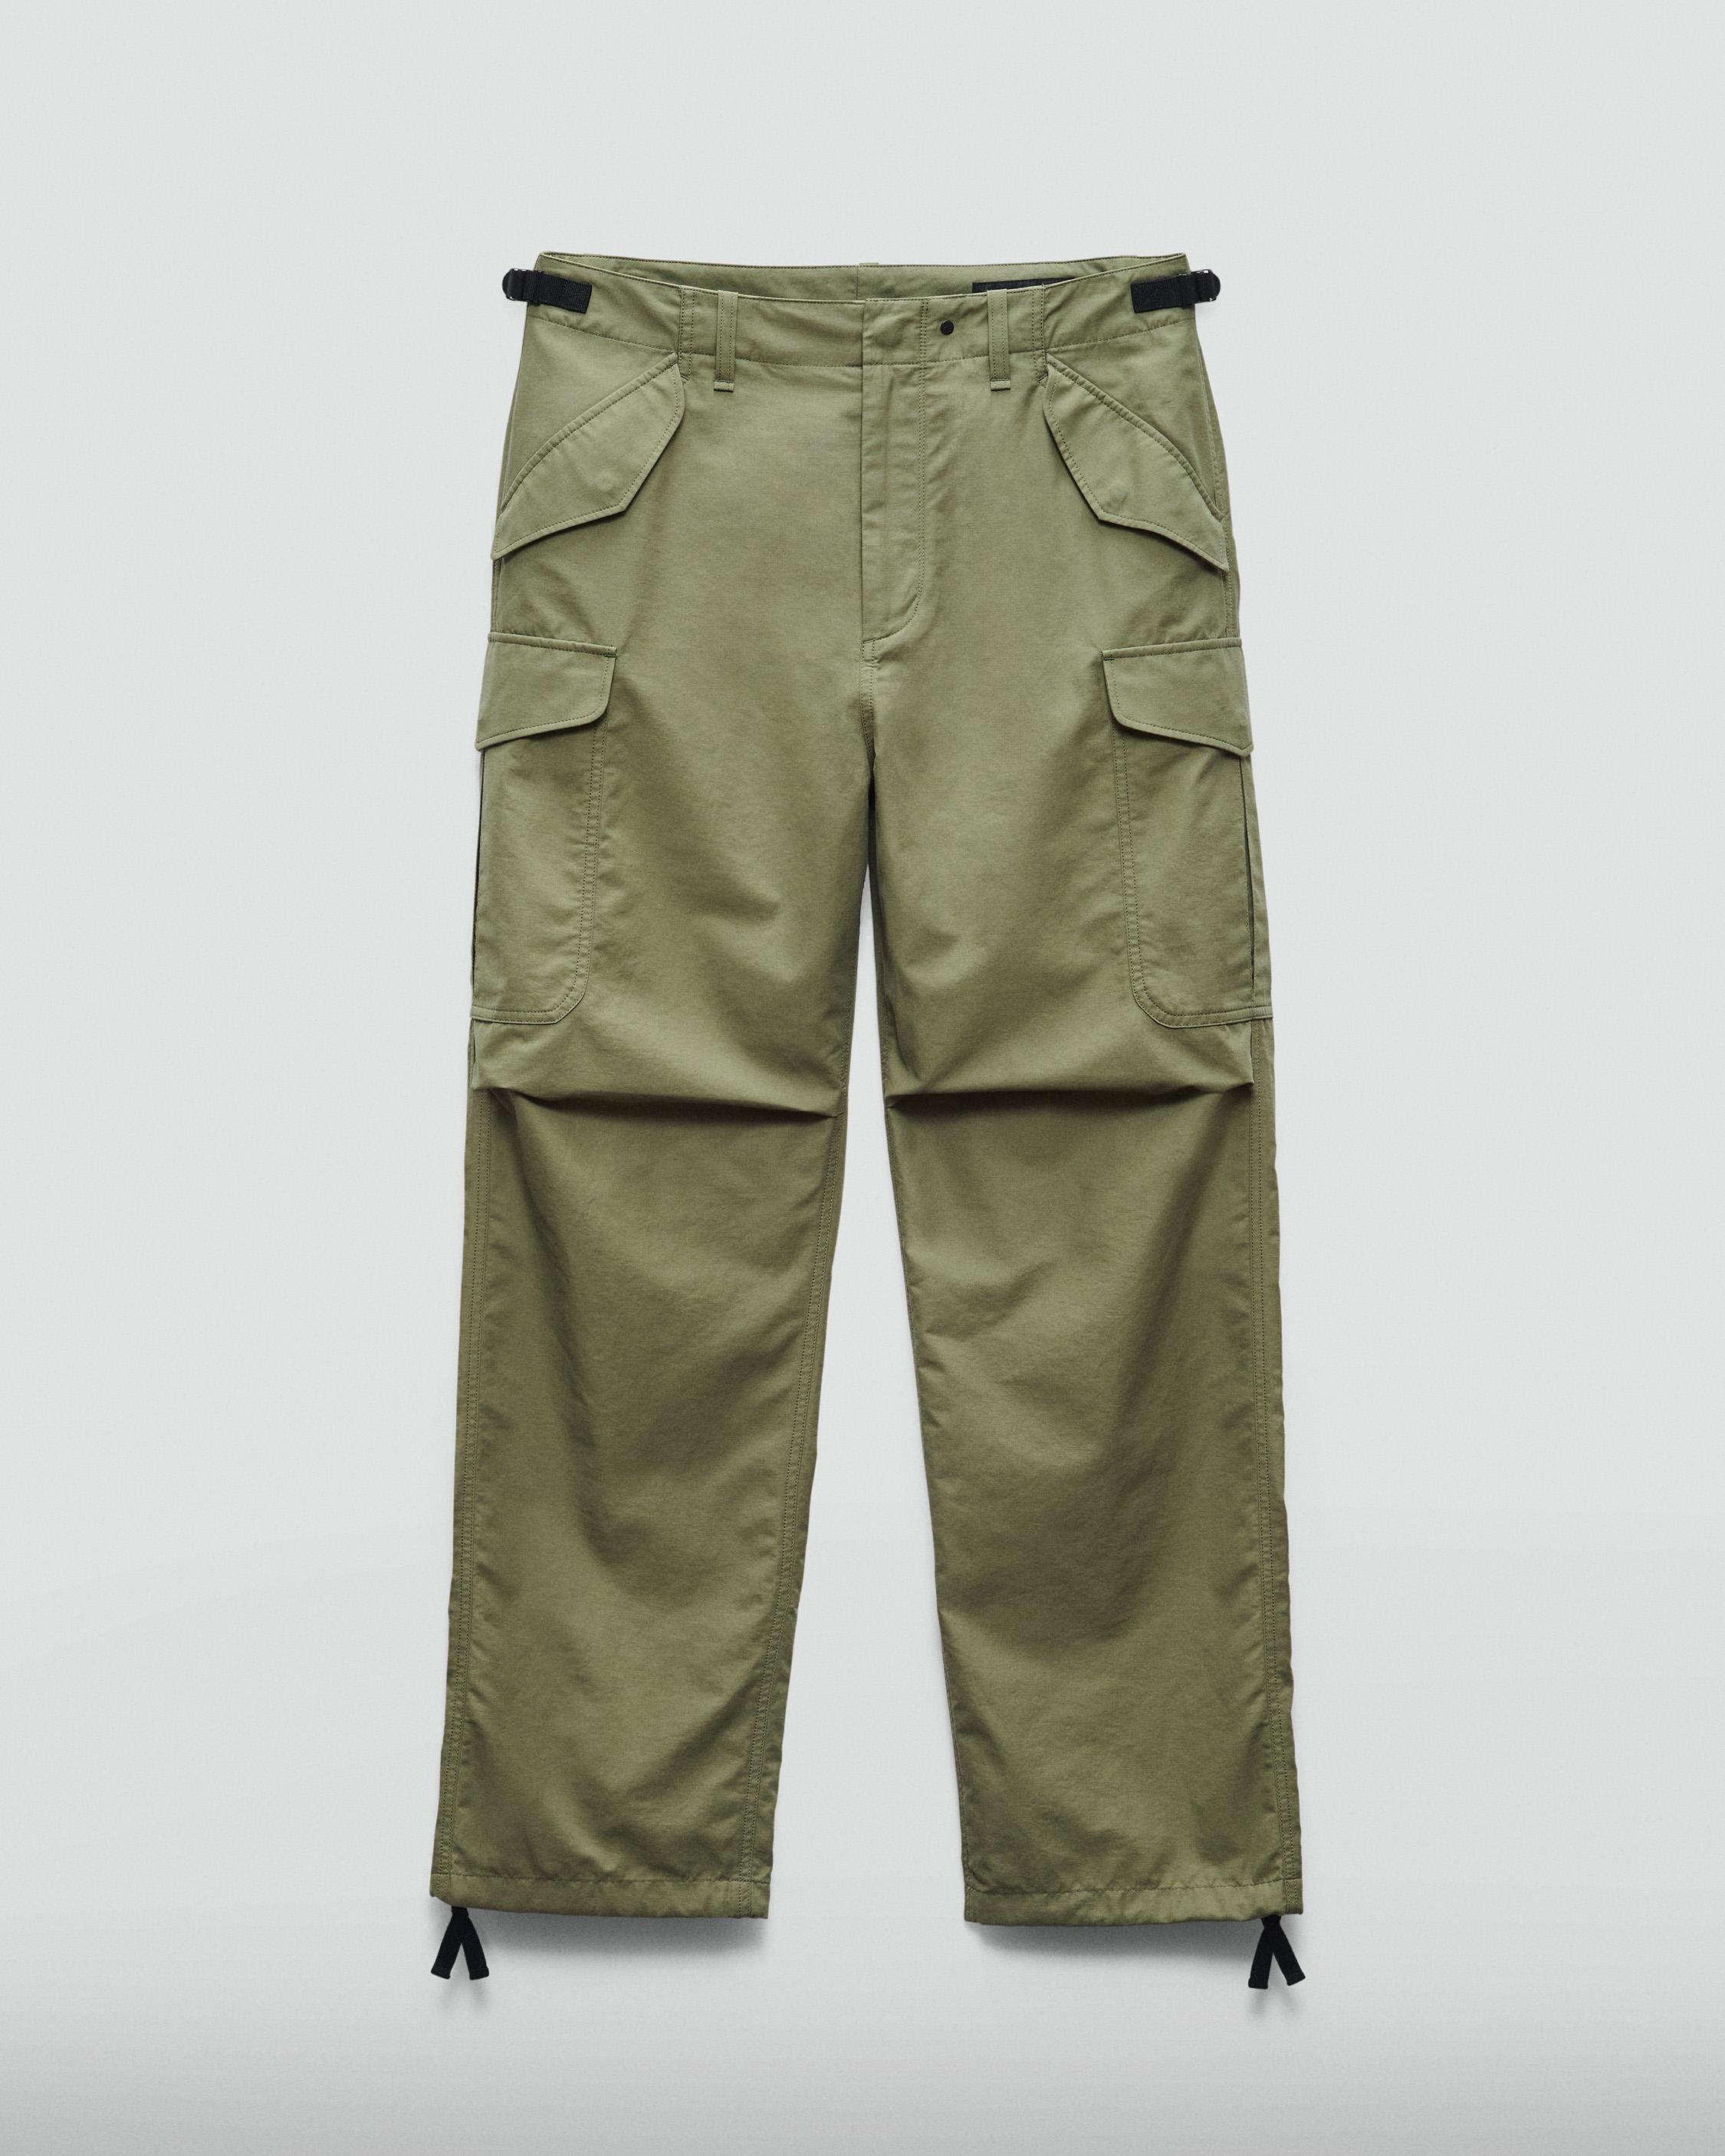 Surplus Nylon Cargo Pant
Relaxed Fit - 1